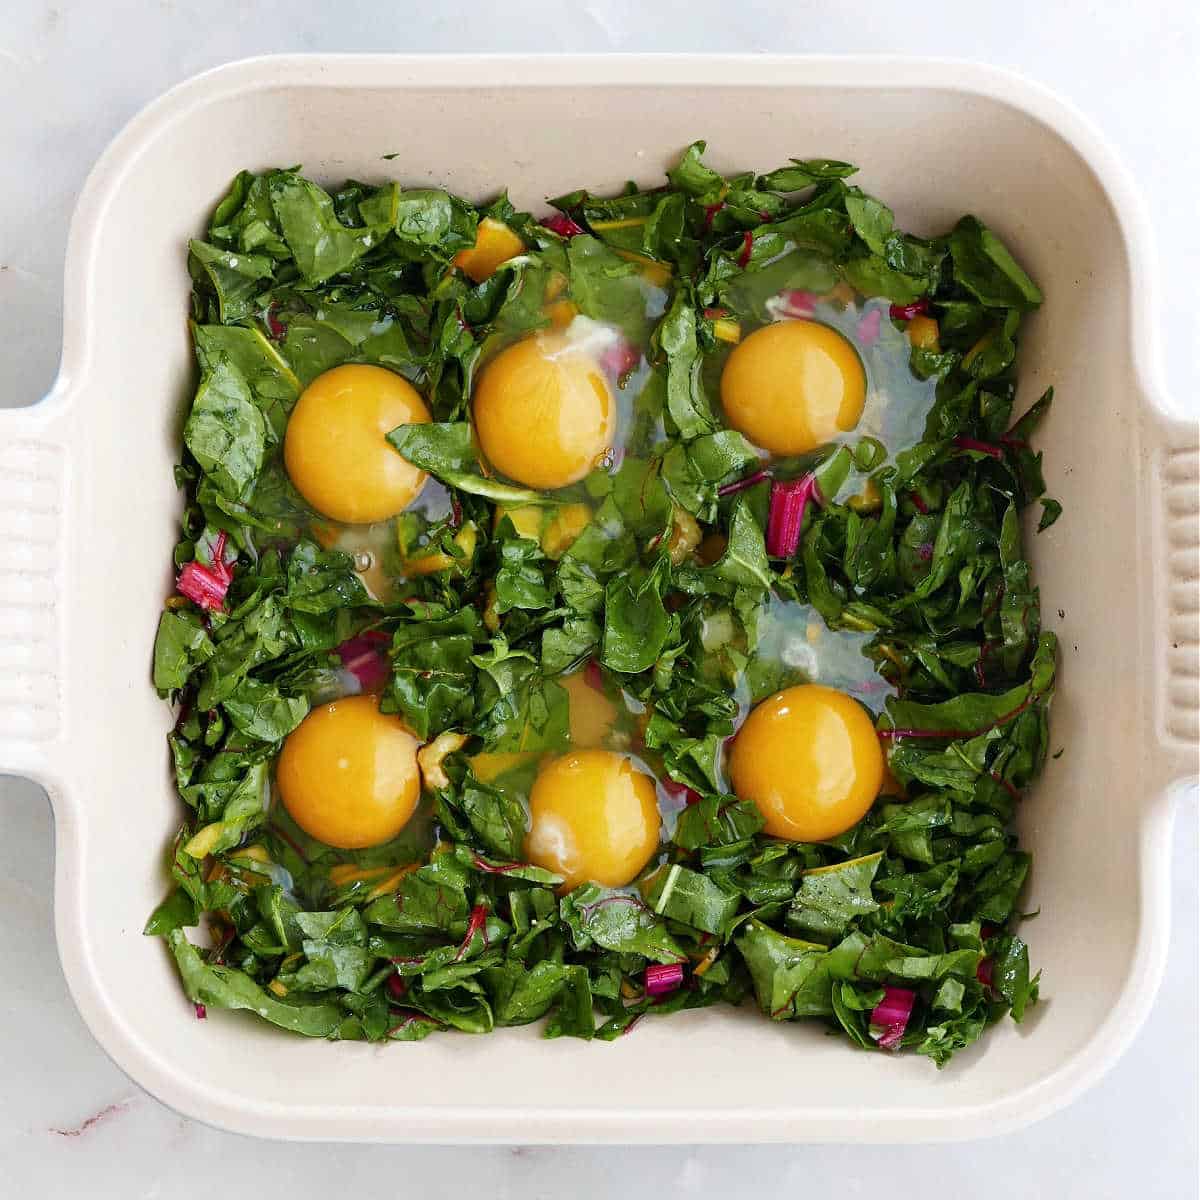 6 eggs cracked into a bed of chard leaves and stems in a baking dish